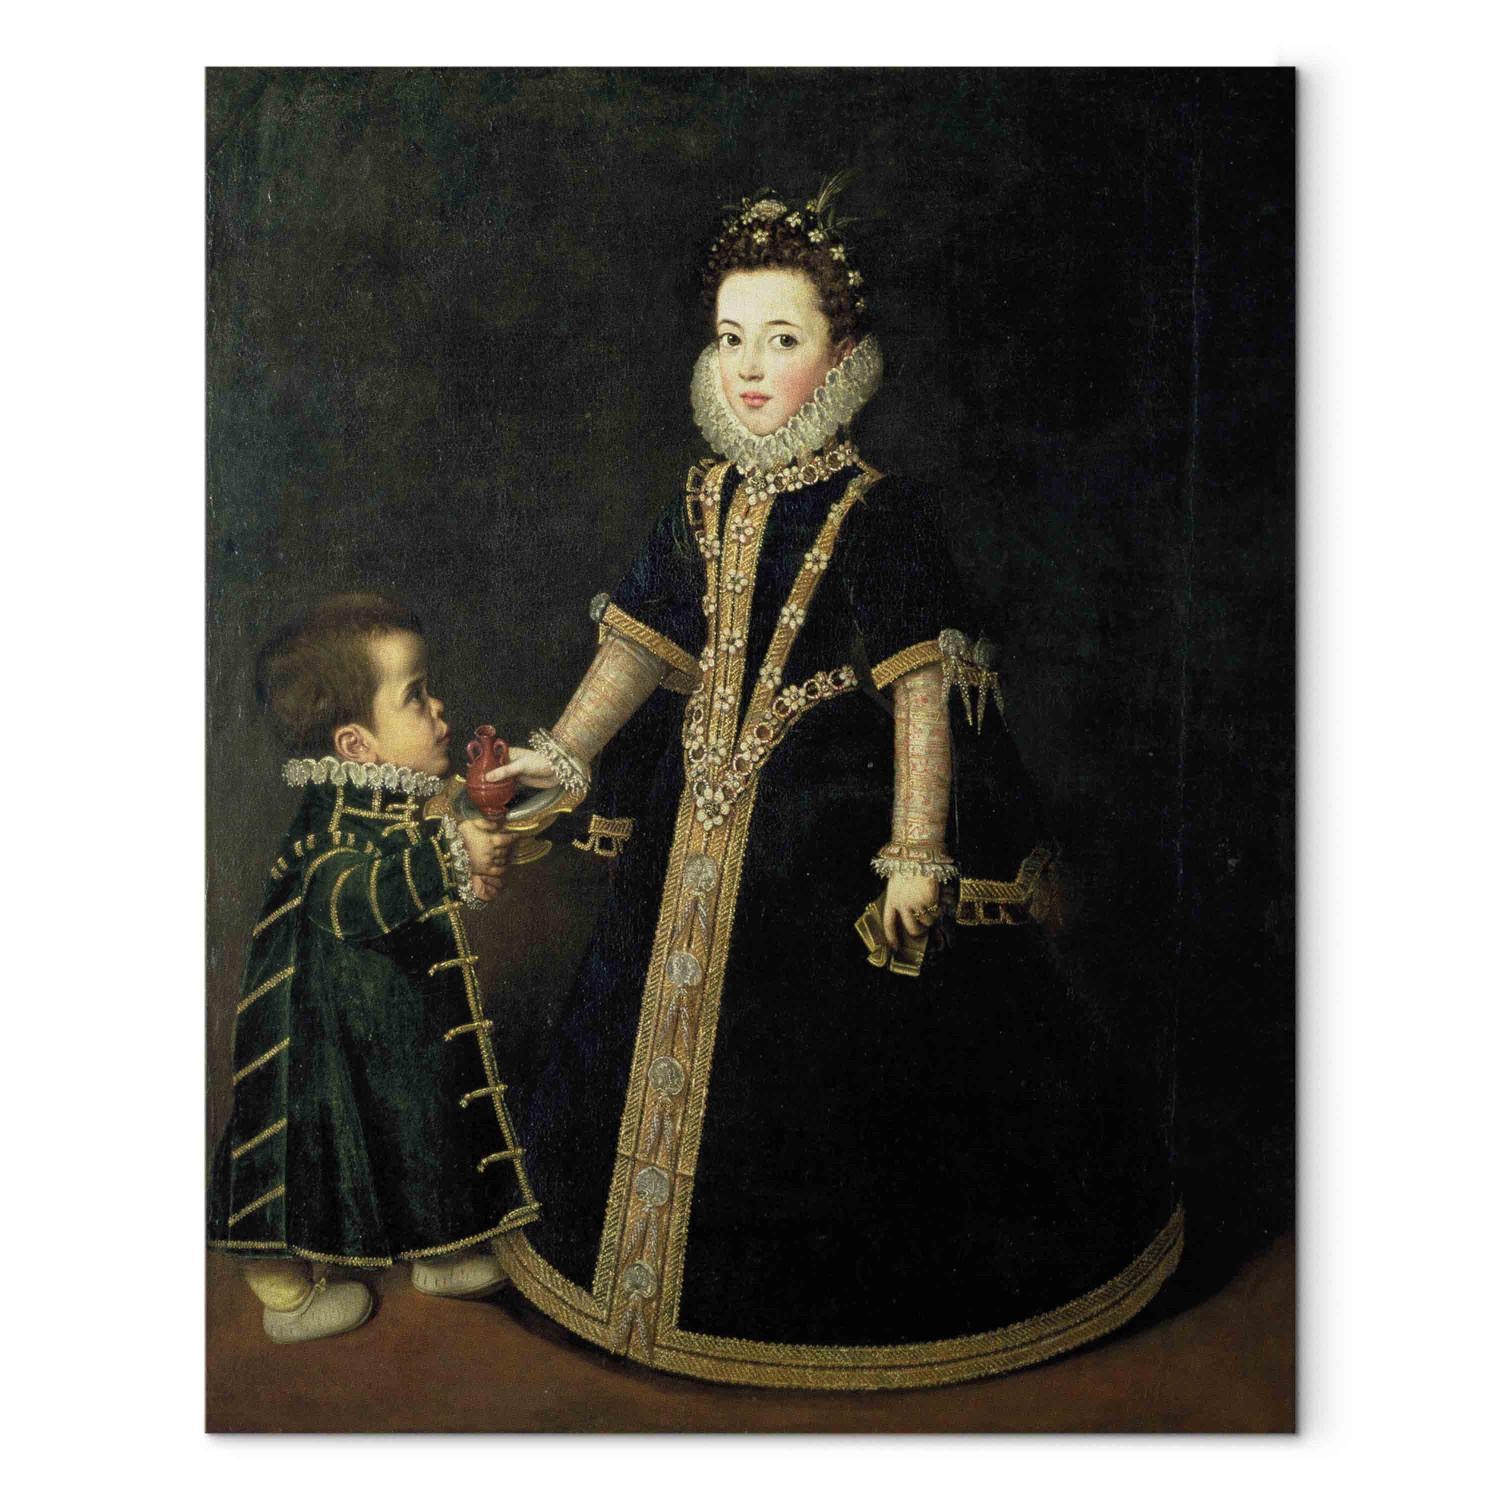 Cuadro famoso Girl with a dwarf, thought to be a portrait of Margarita of Savoy, daughter of the Duke and Duchess of Savoy